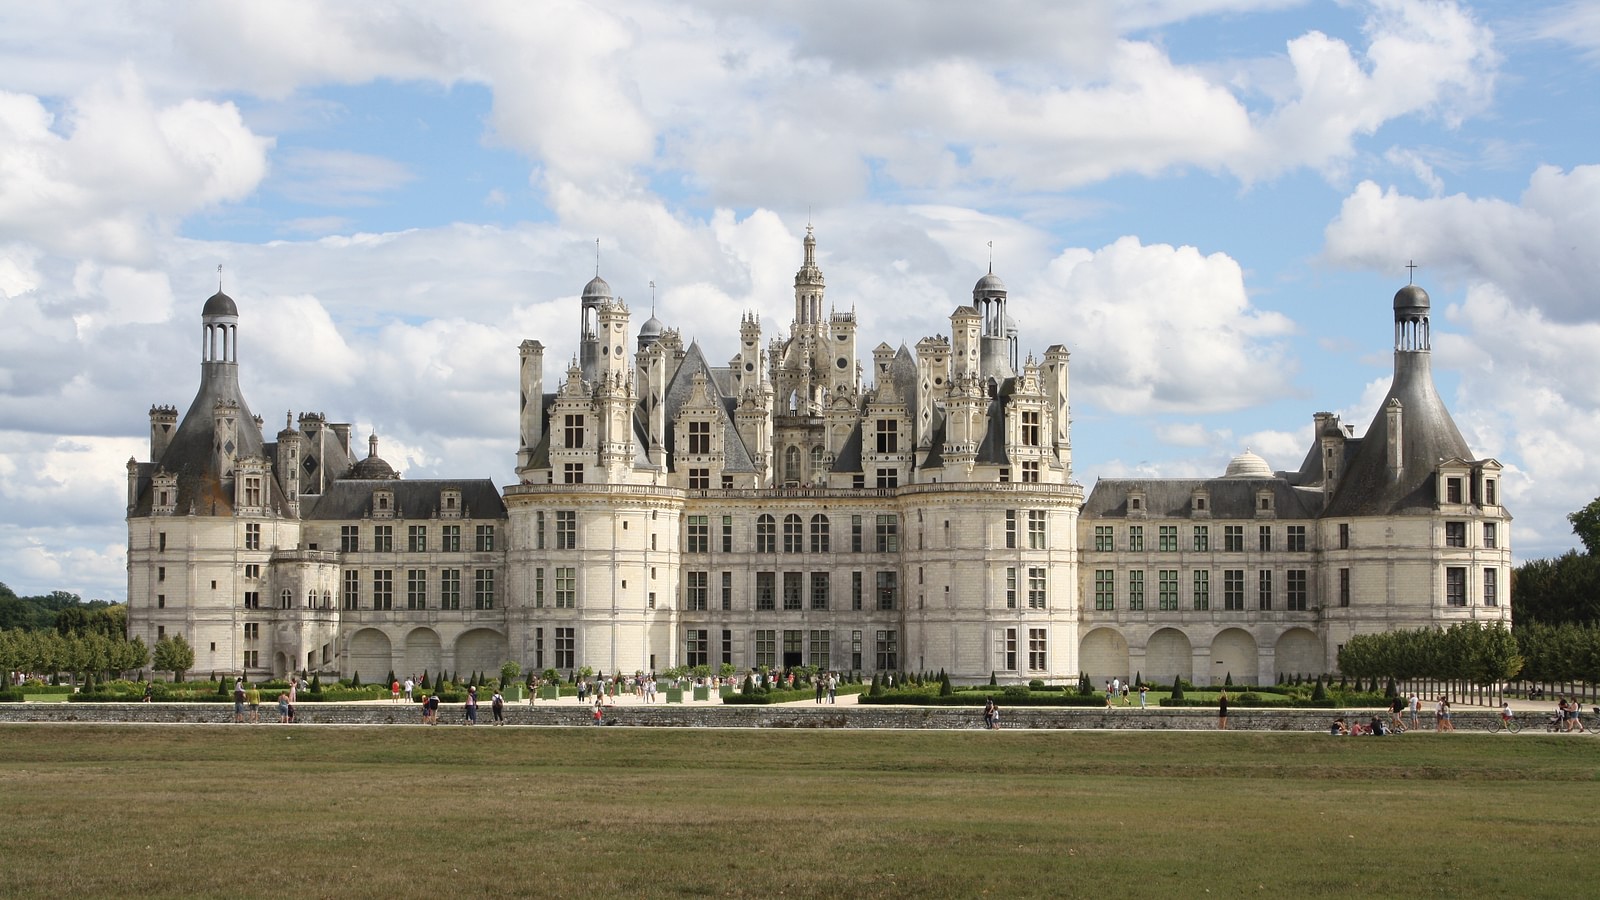 Visiting Chateau de Chambord in the Loire Valley, France